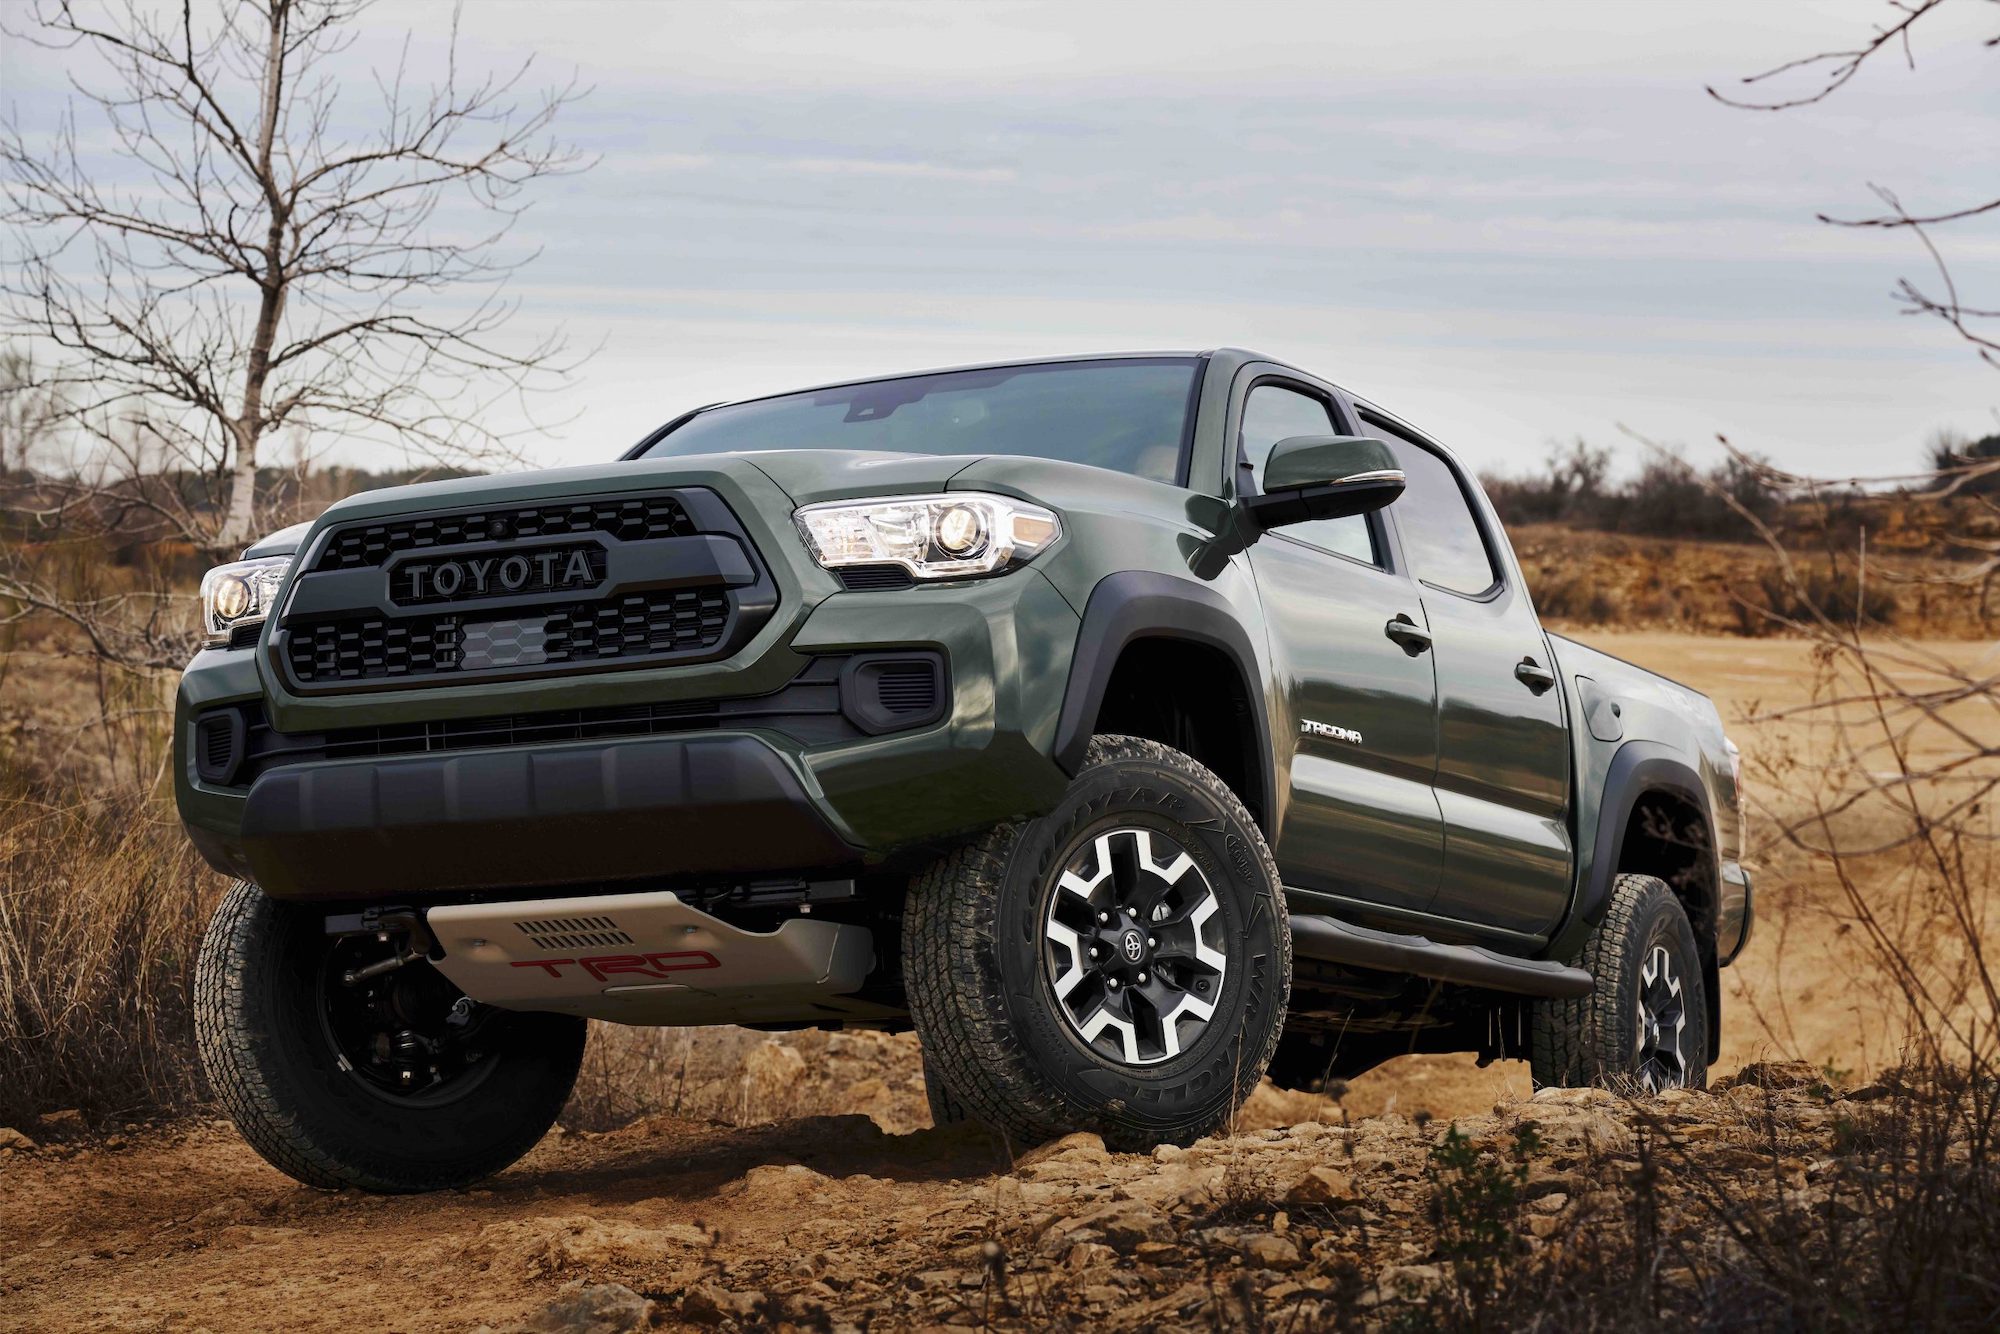 Toyota recalls 381,000 Tacoma trucks for loose nuts